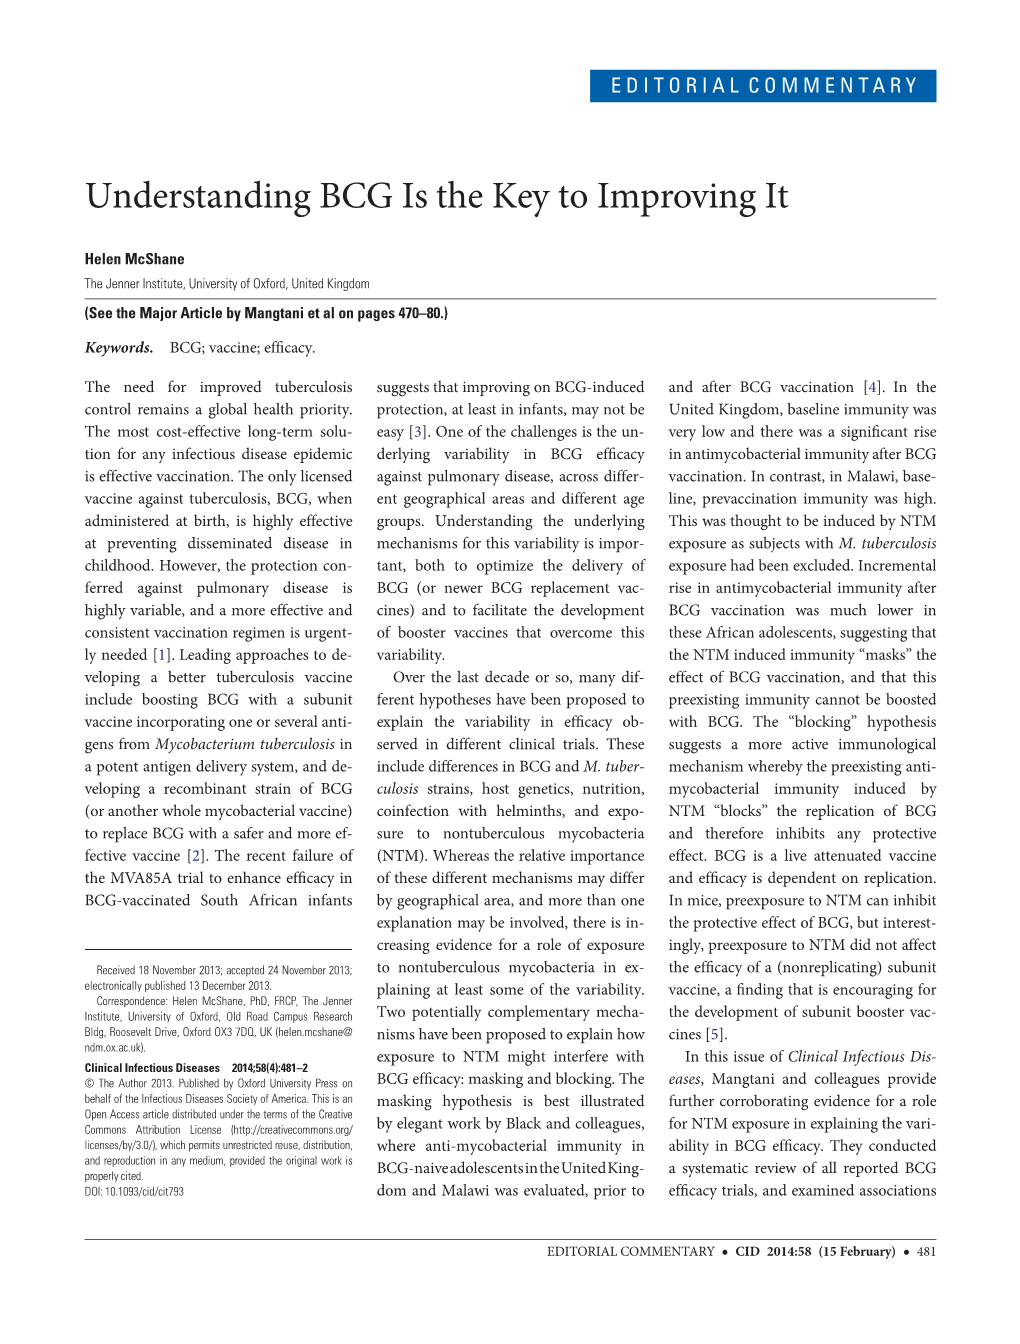 Understanding BCG Is the Key to Improving It